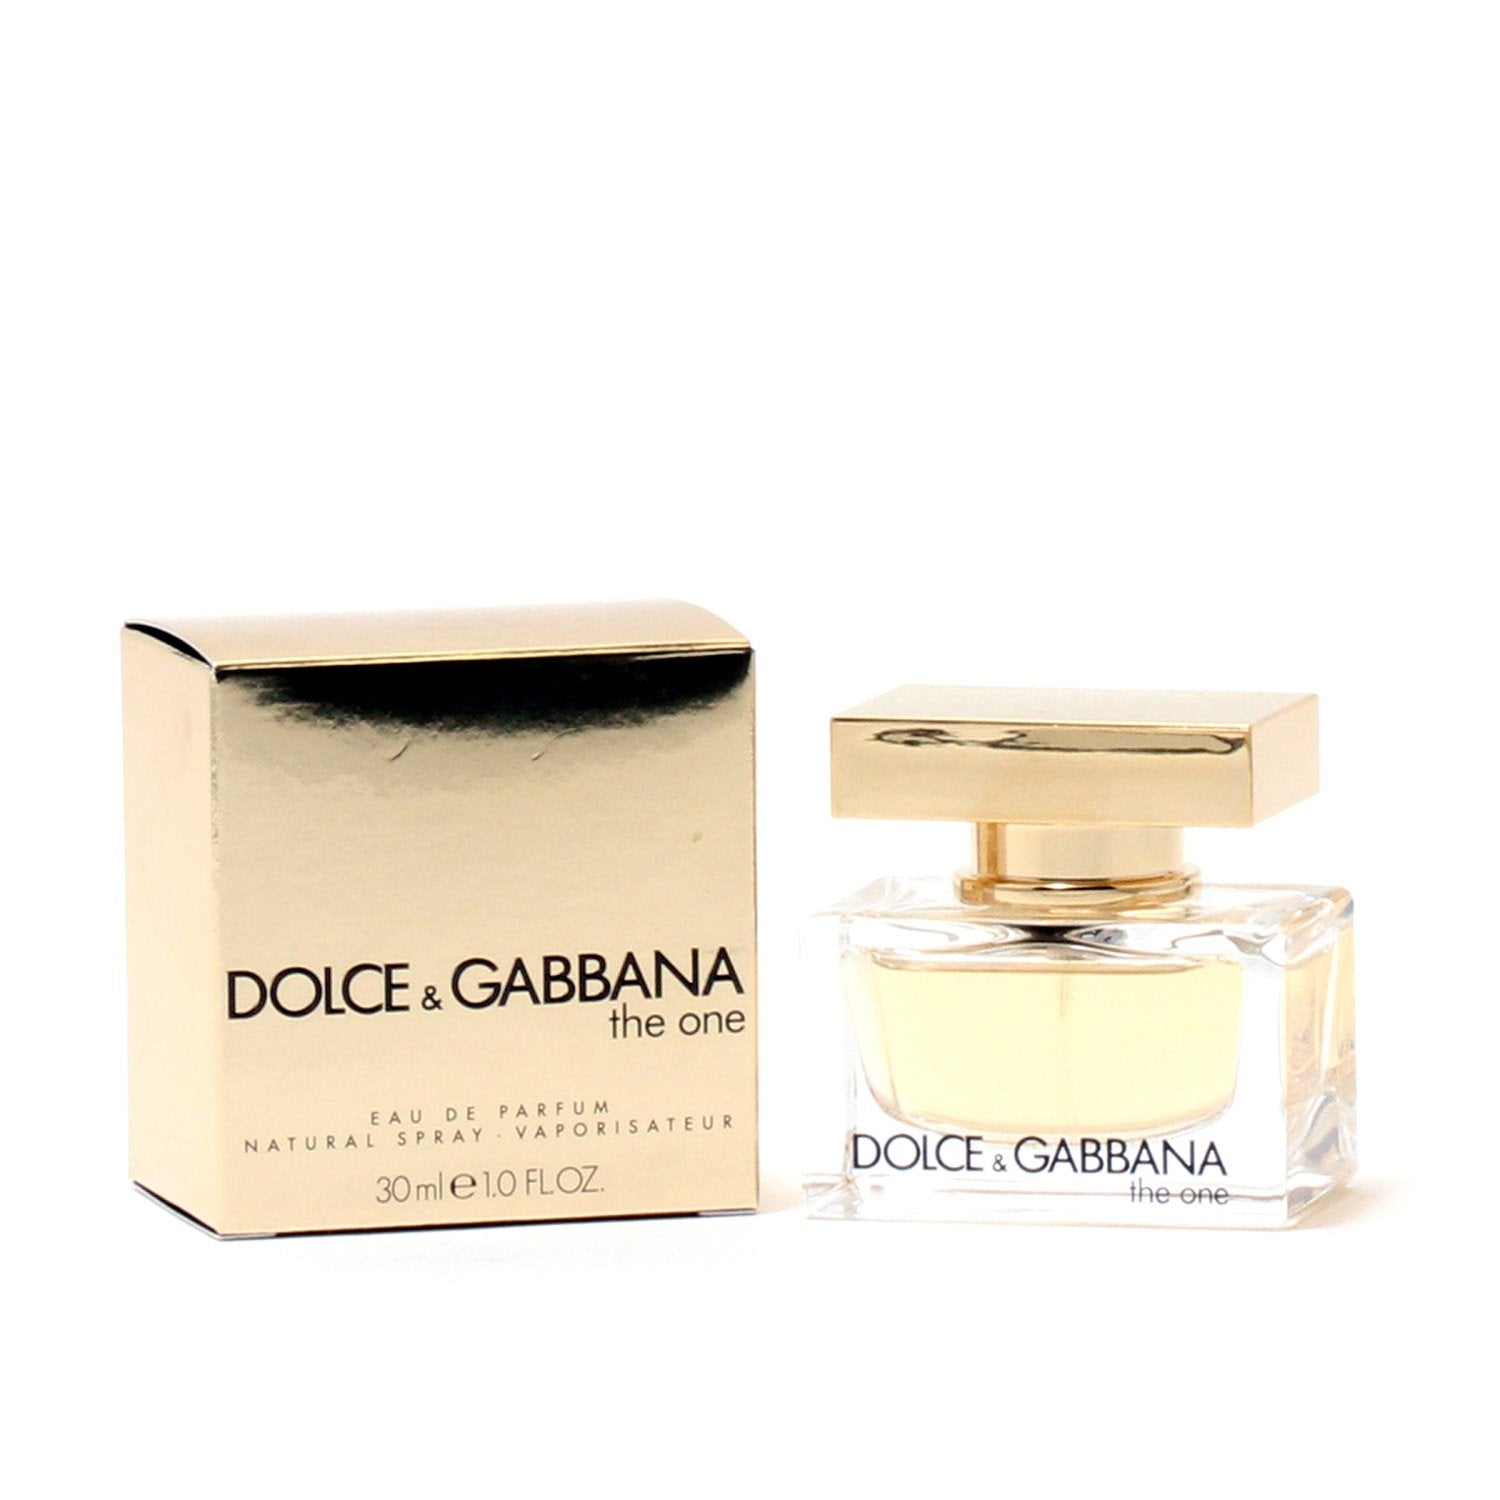 Which is better as a gift, Gucci, Versace, Dolce and Gabbana or